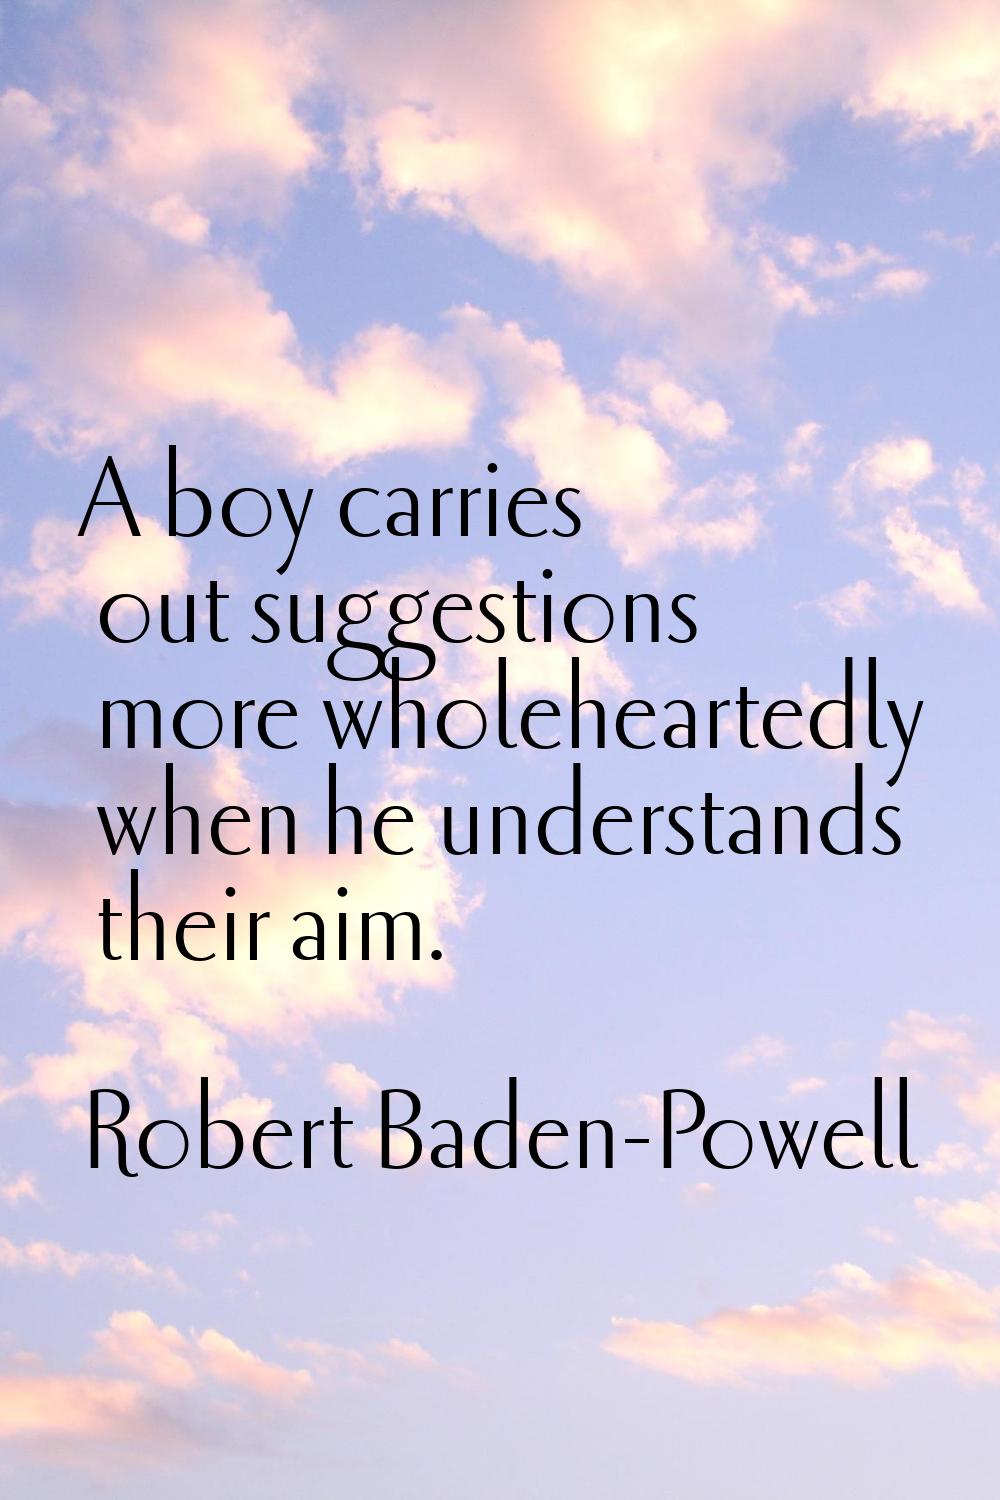 A boy carries out suggestions more wholeheartedly when he understands their aim.